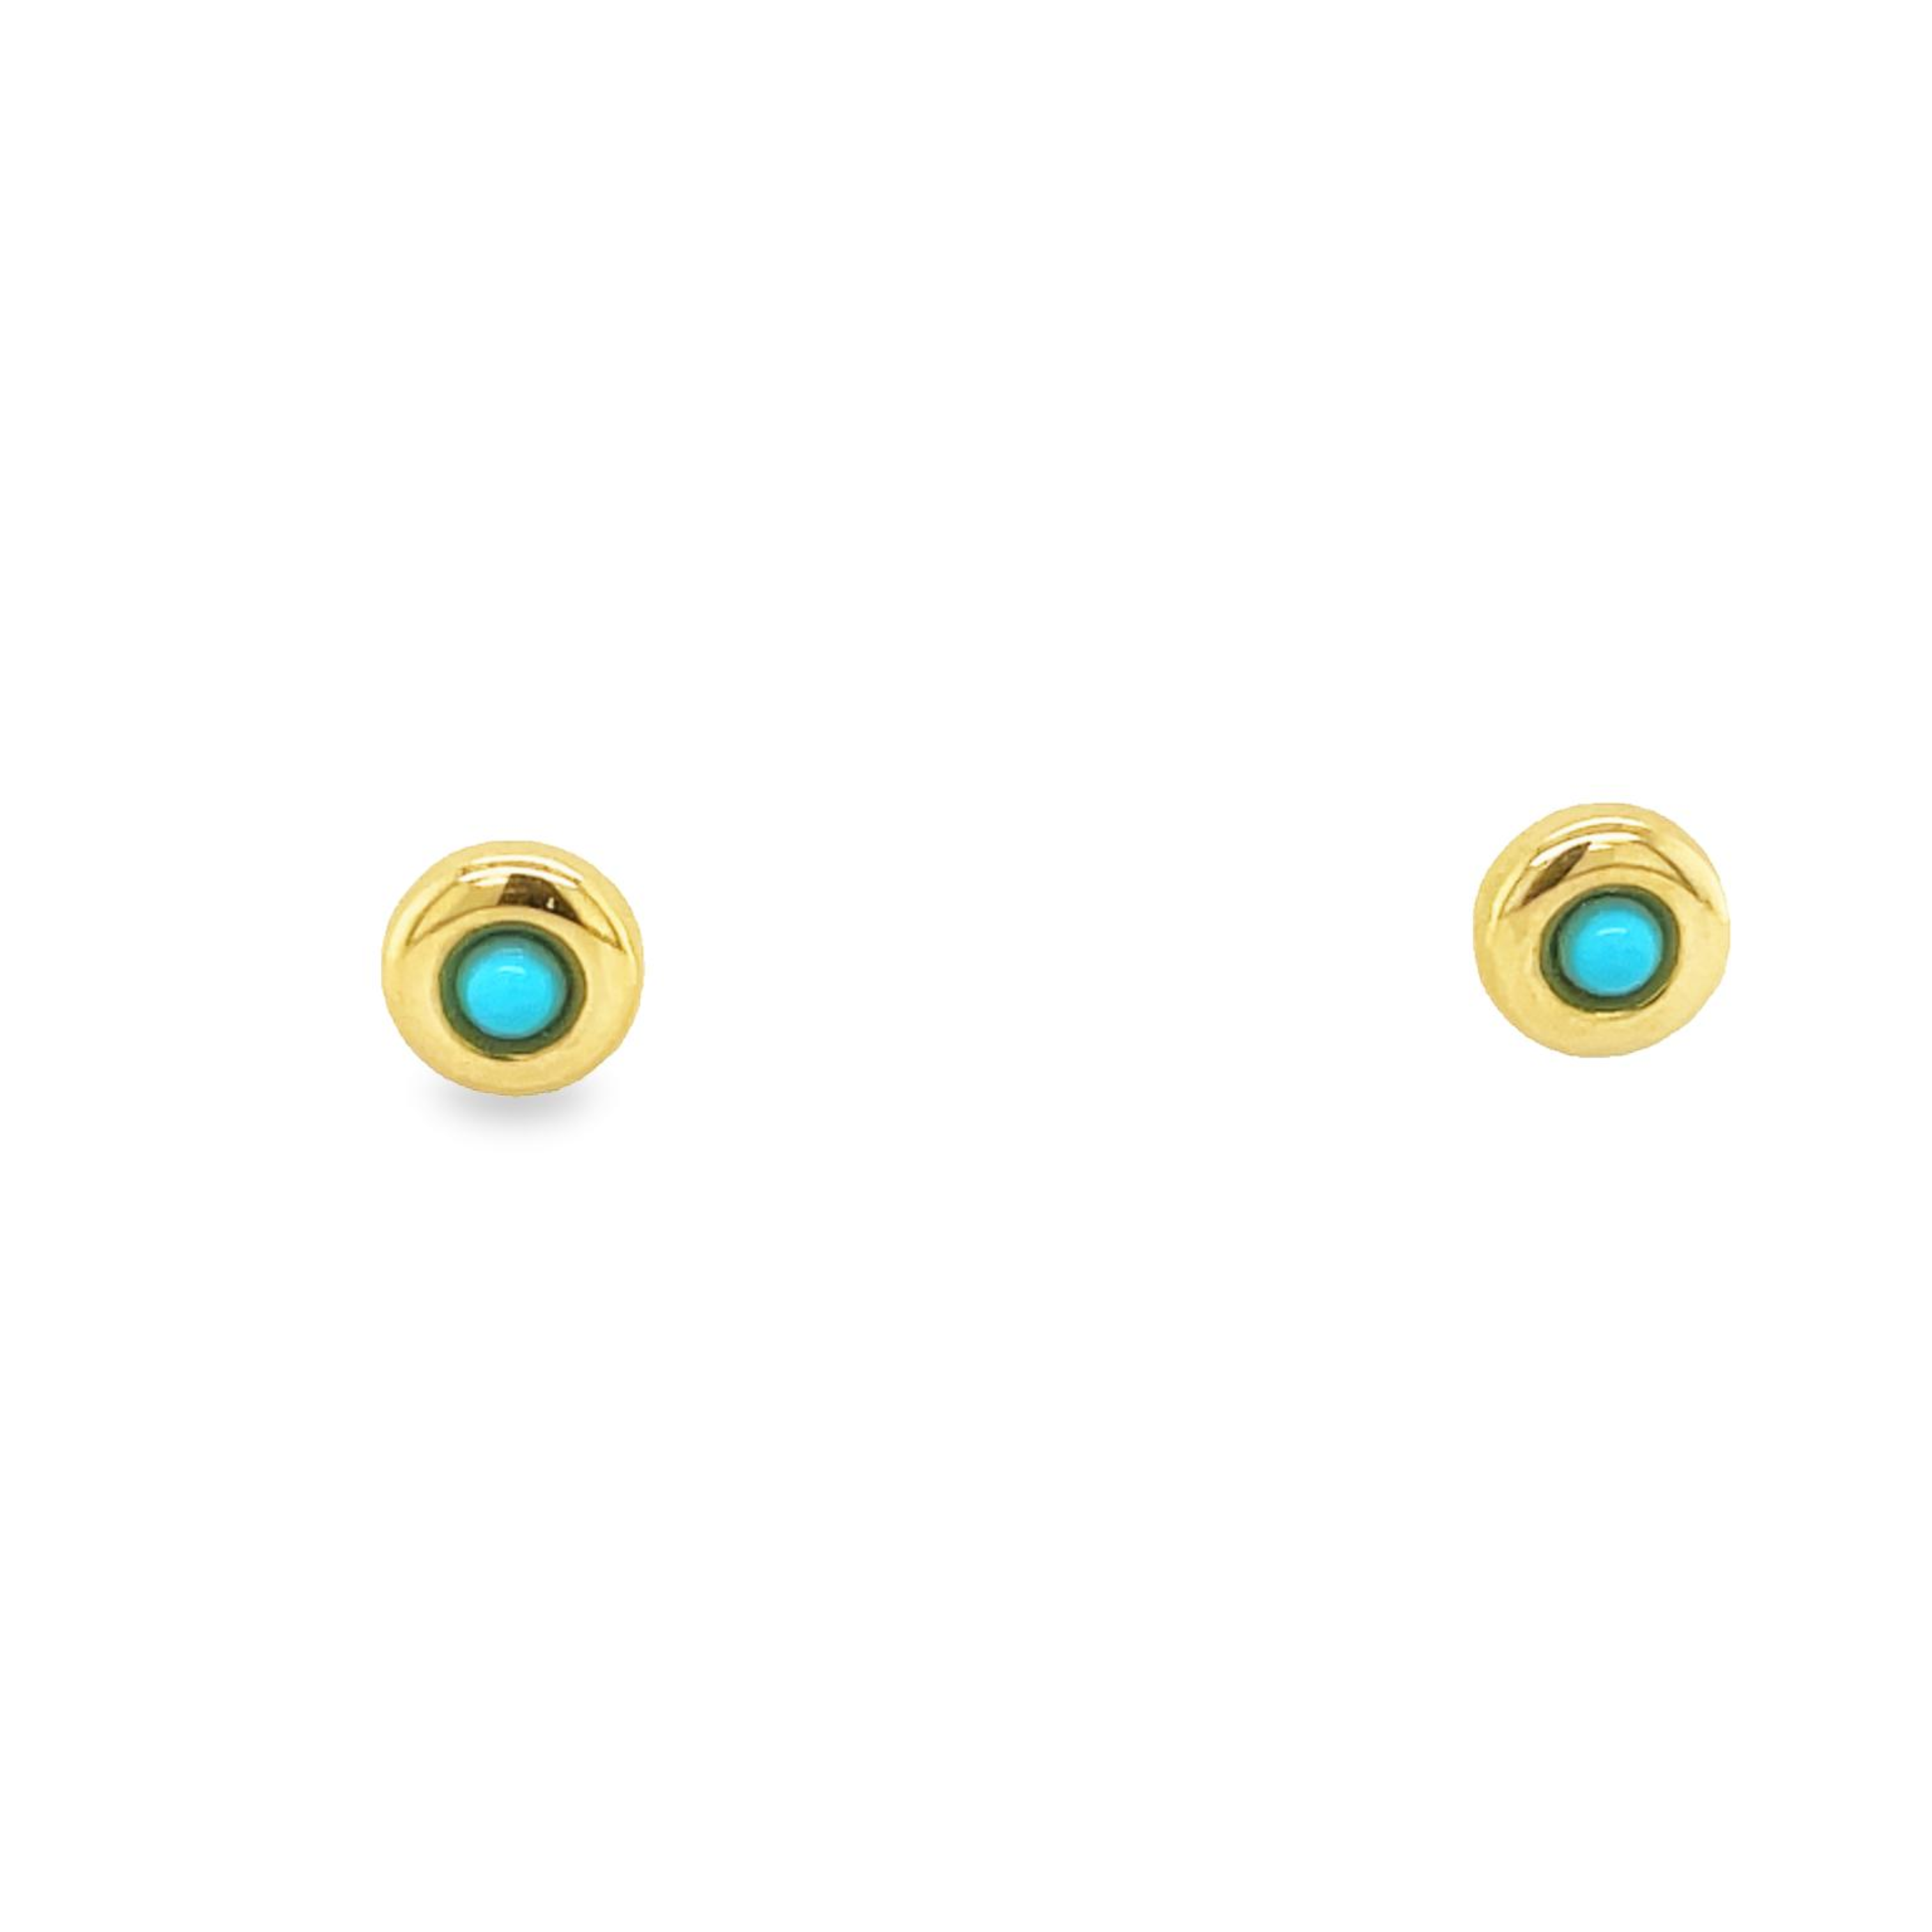 These 14k yellow gold baby earrings feature small treated turquoise stones, securely set with baby backs for a beautiful finish. The treated turquoise stones are of the highest quality and durability, providing a timeless look that you and your baby can enjoy for years to come.